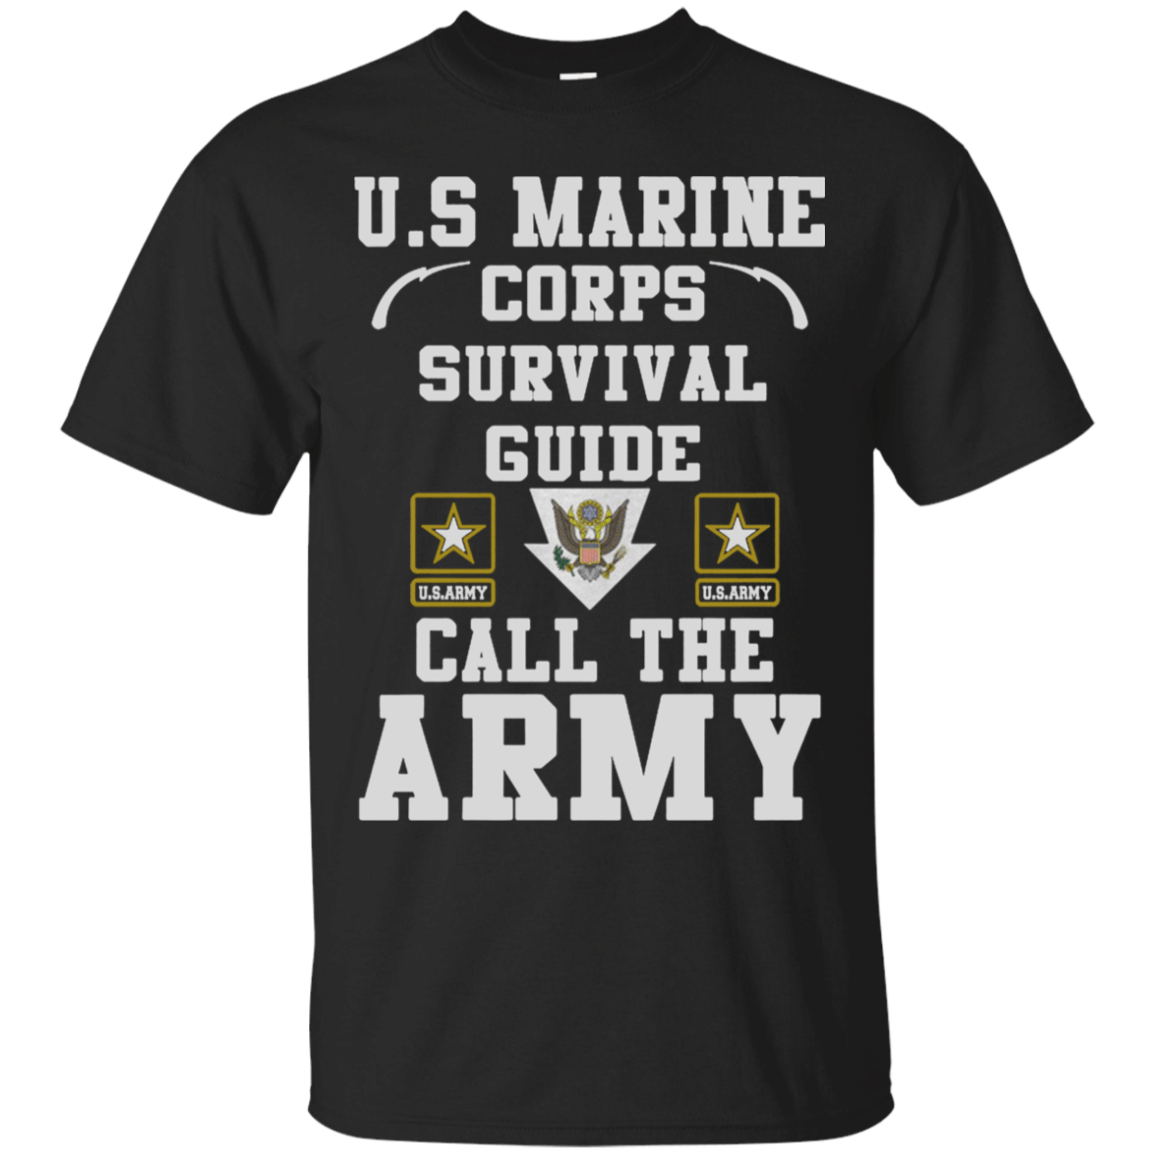 US Marine corps survival guide US Army call the Army shirt Cotton Shirt